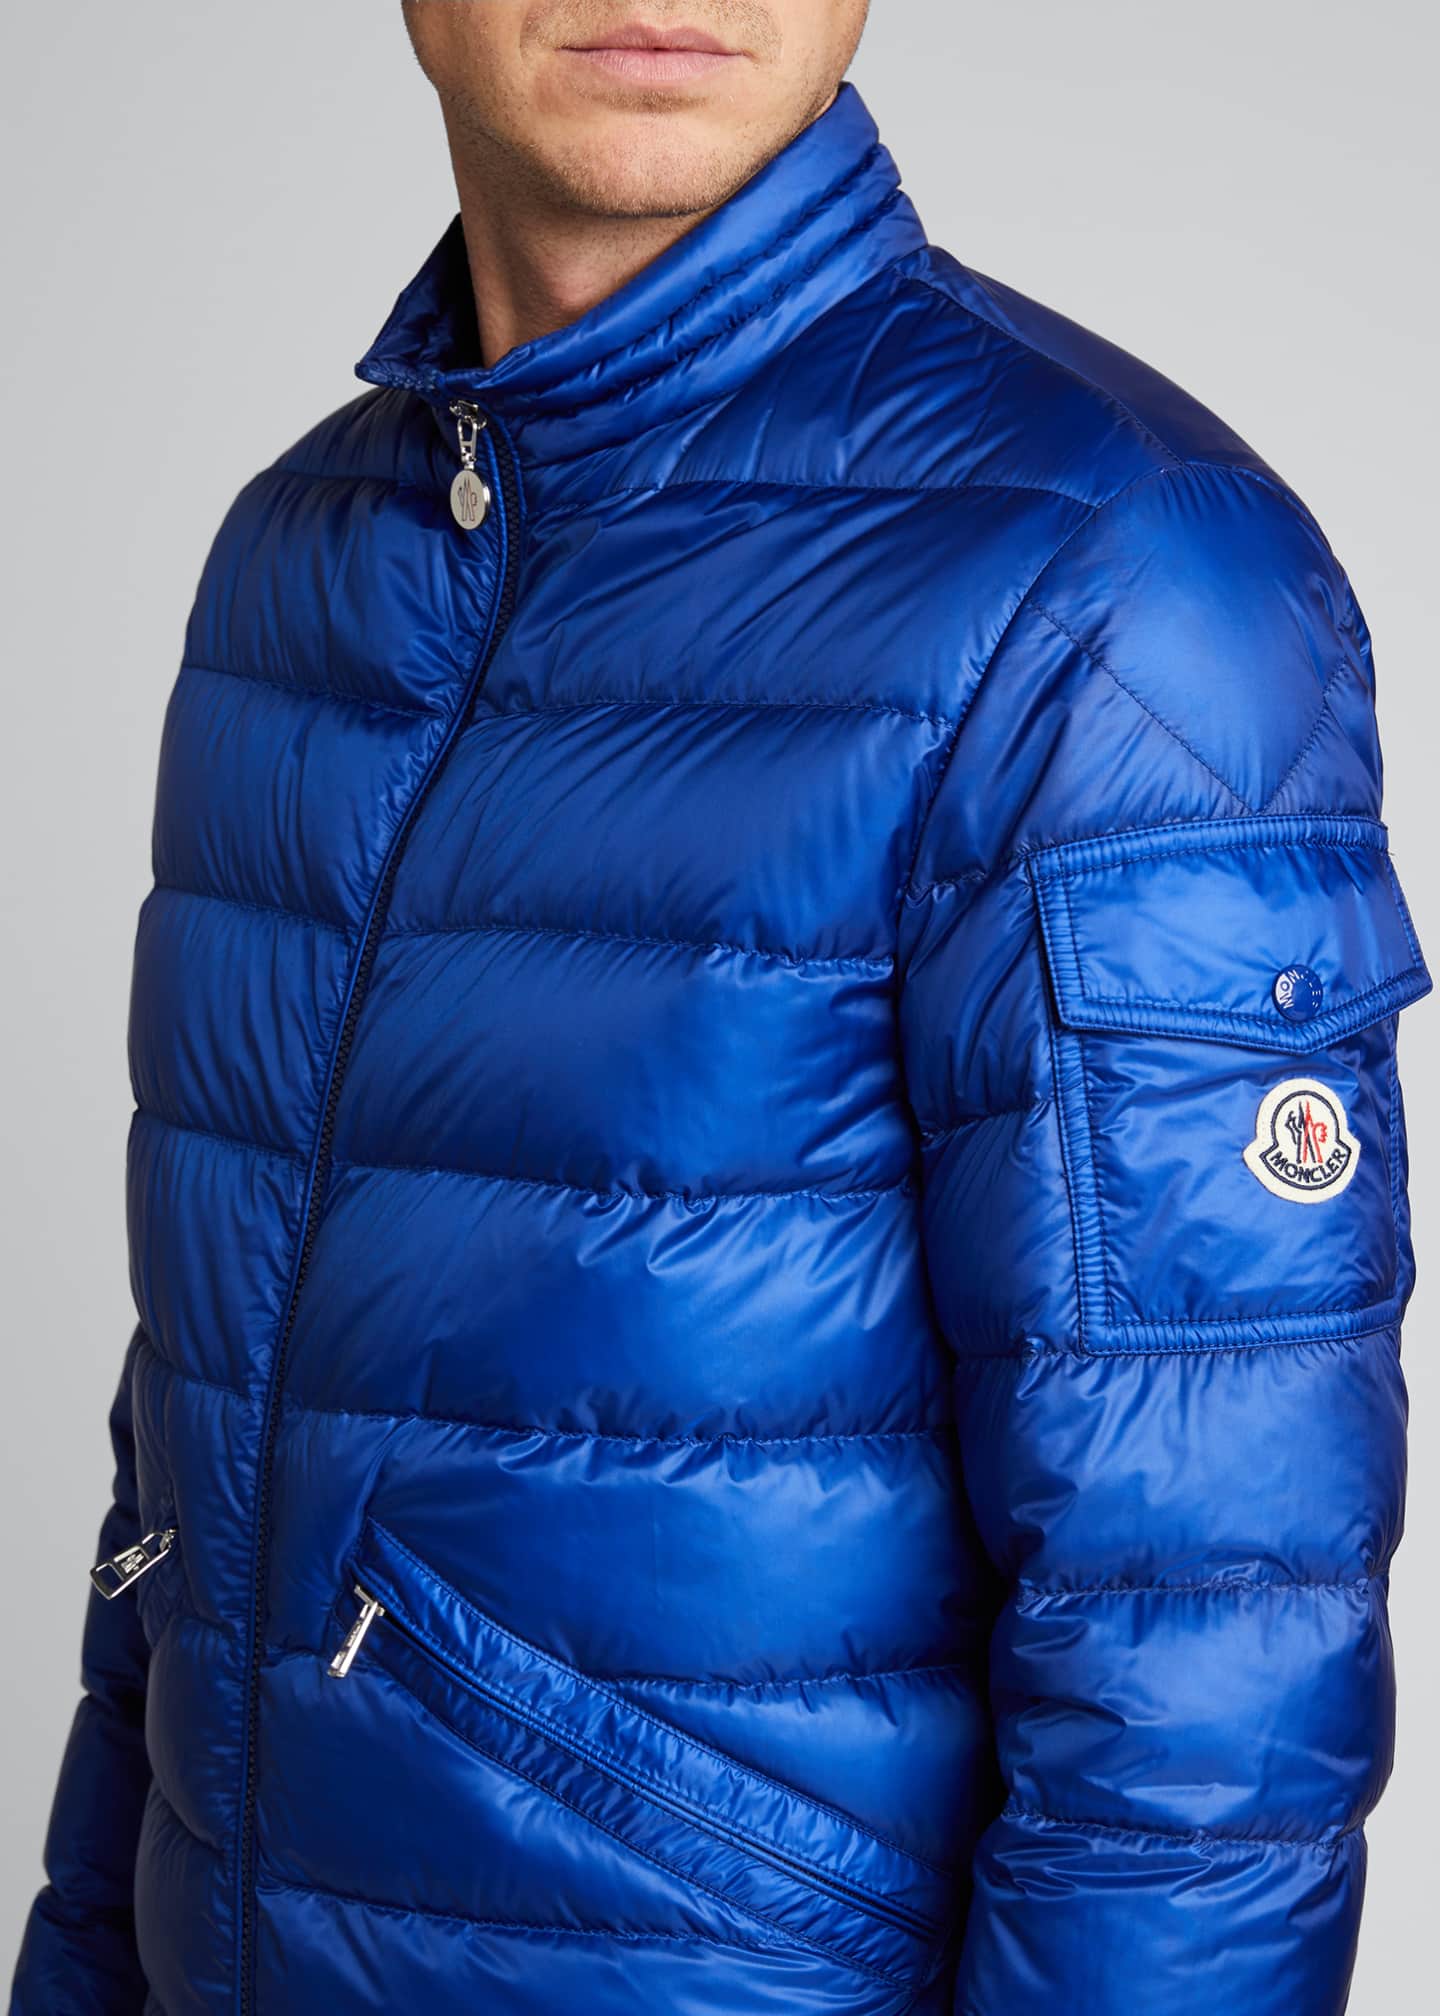 Moncler Men's Agay Down Quilted Jacket - Bergdorf Goodman